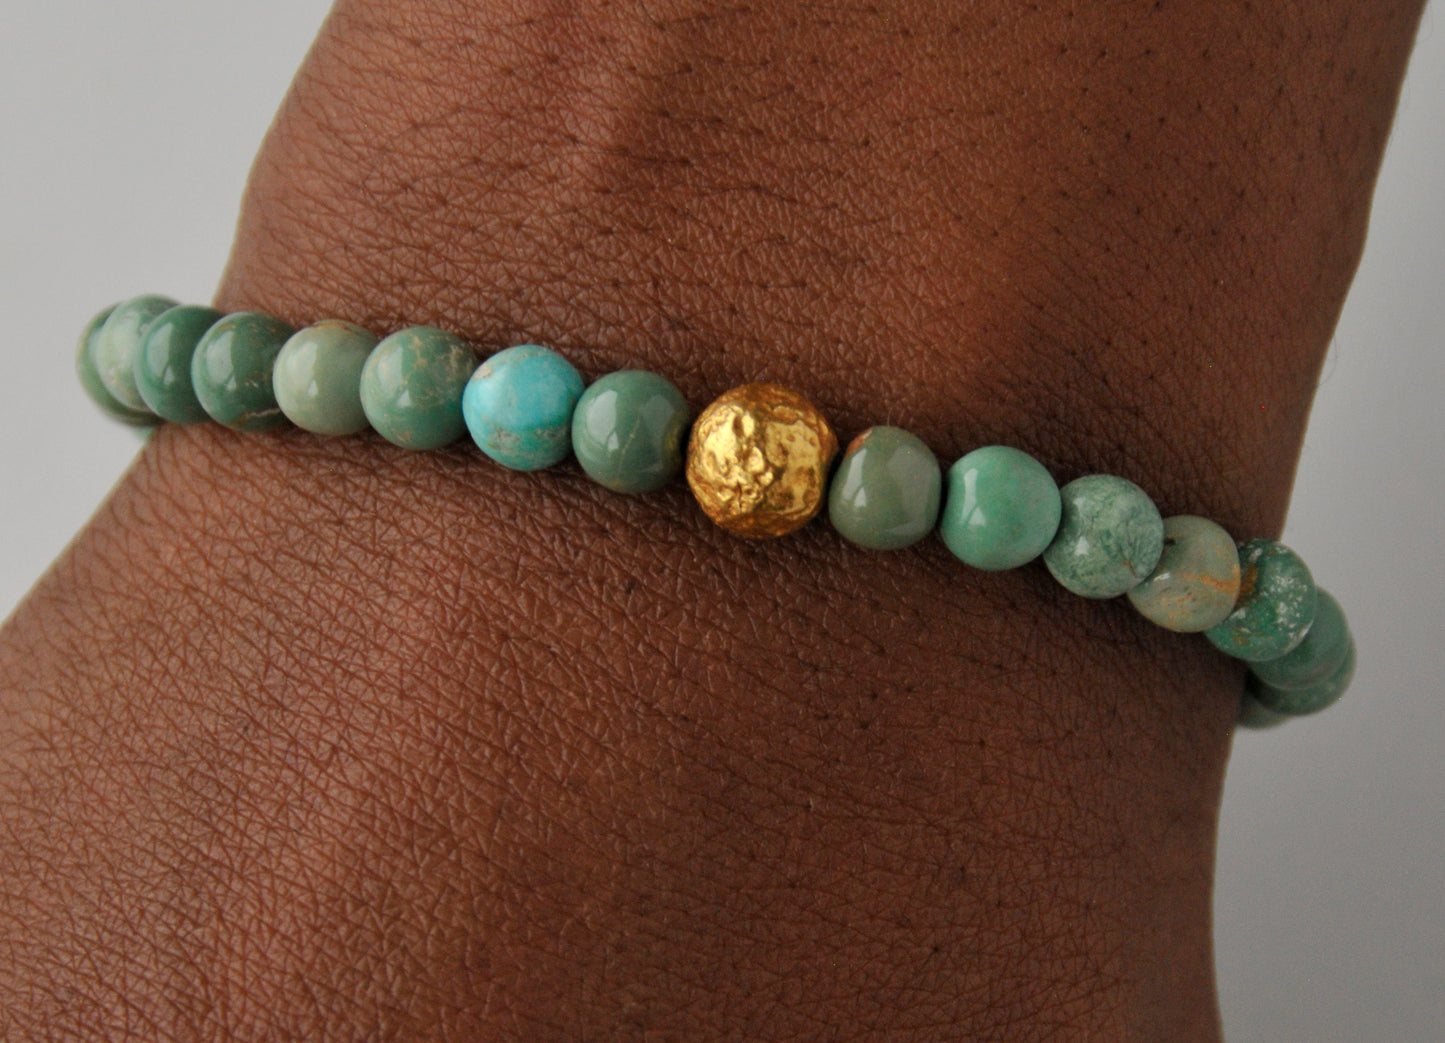 18 and 14 kt Gold & Turquoise Bracelet | SU-009